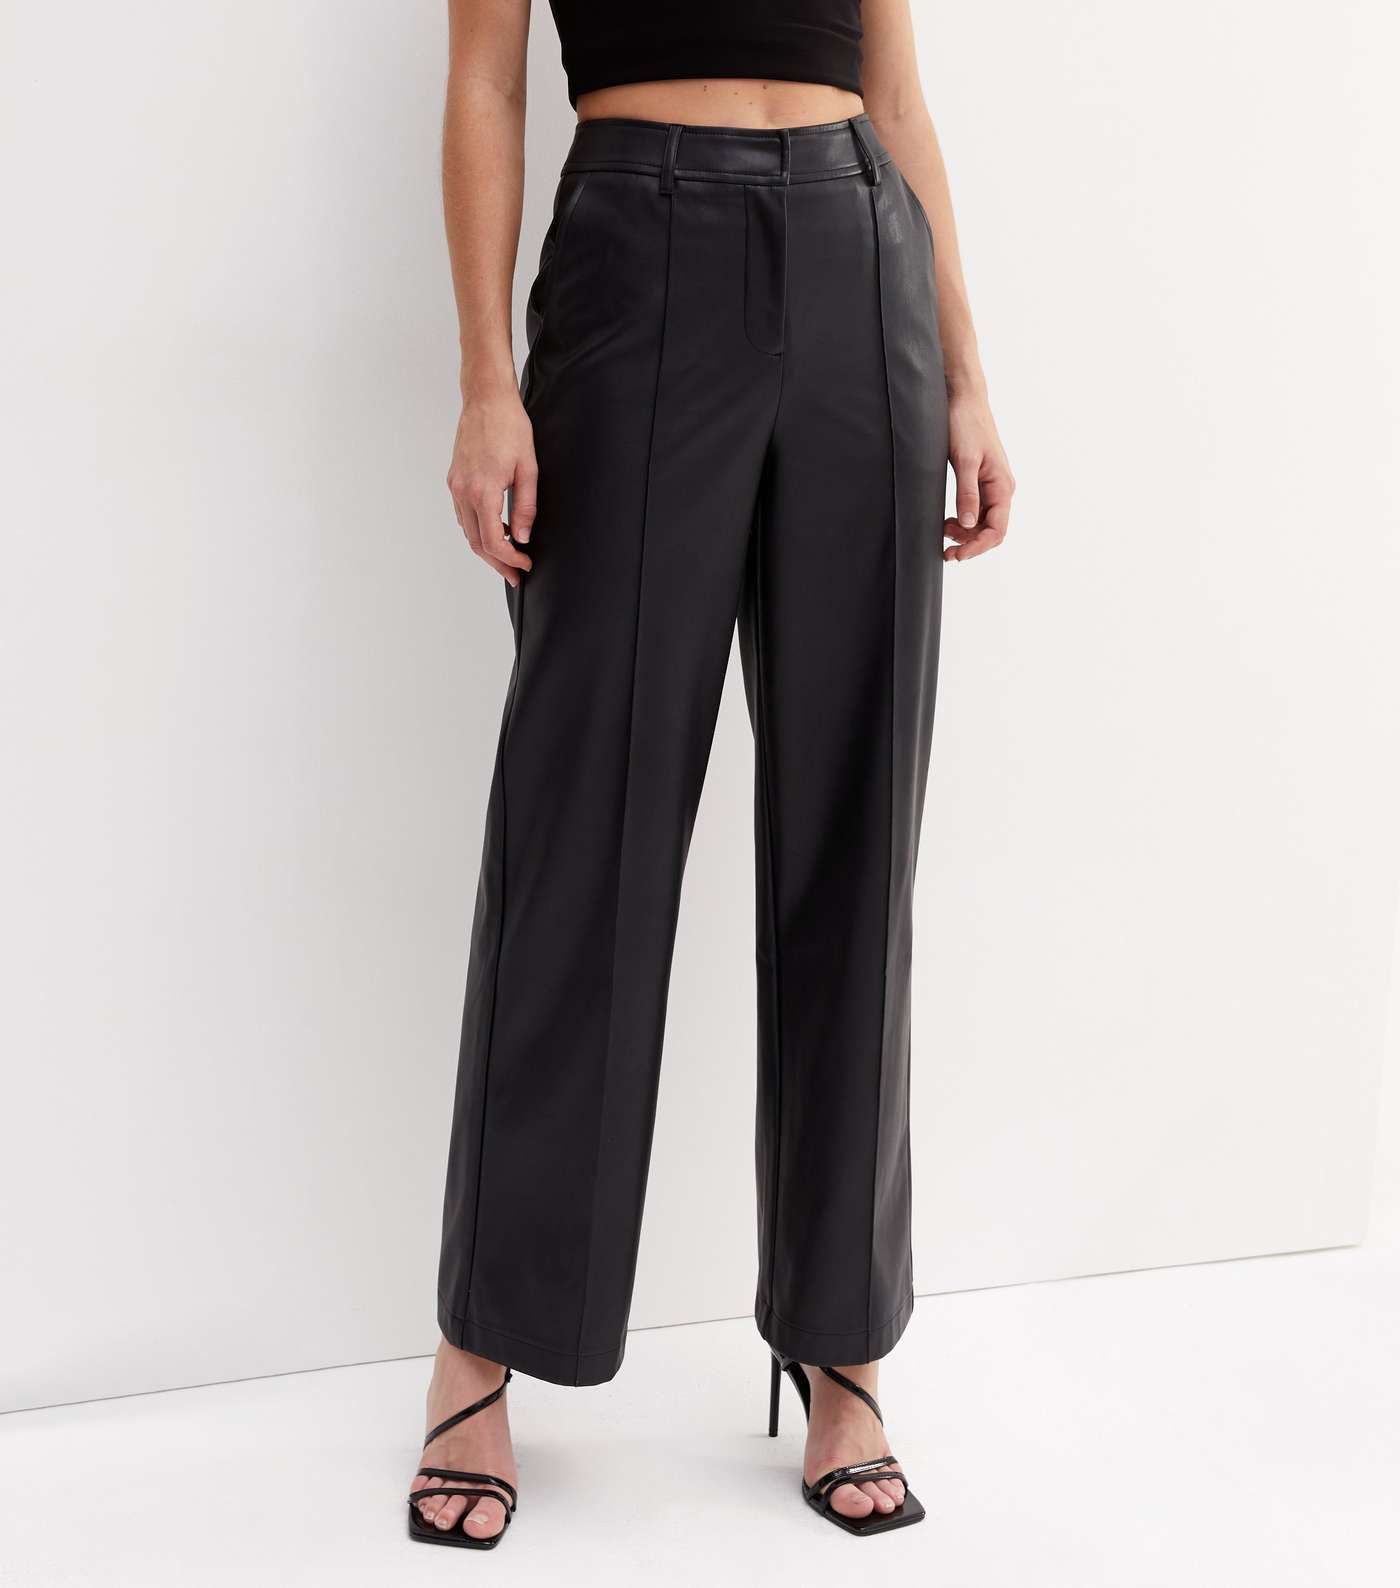 Black Leather-Look Wide Leg Trousers Image 2